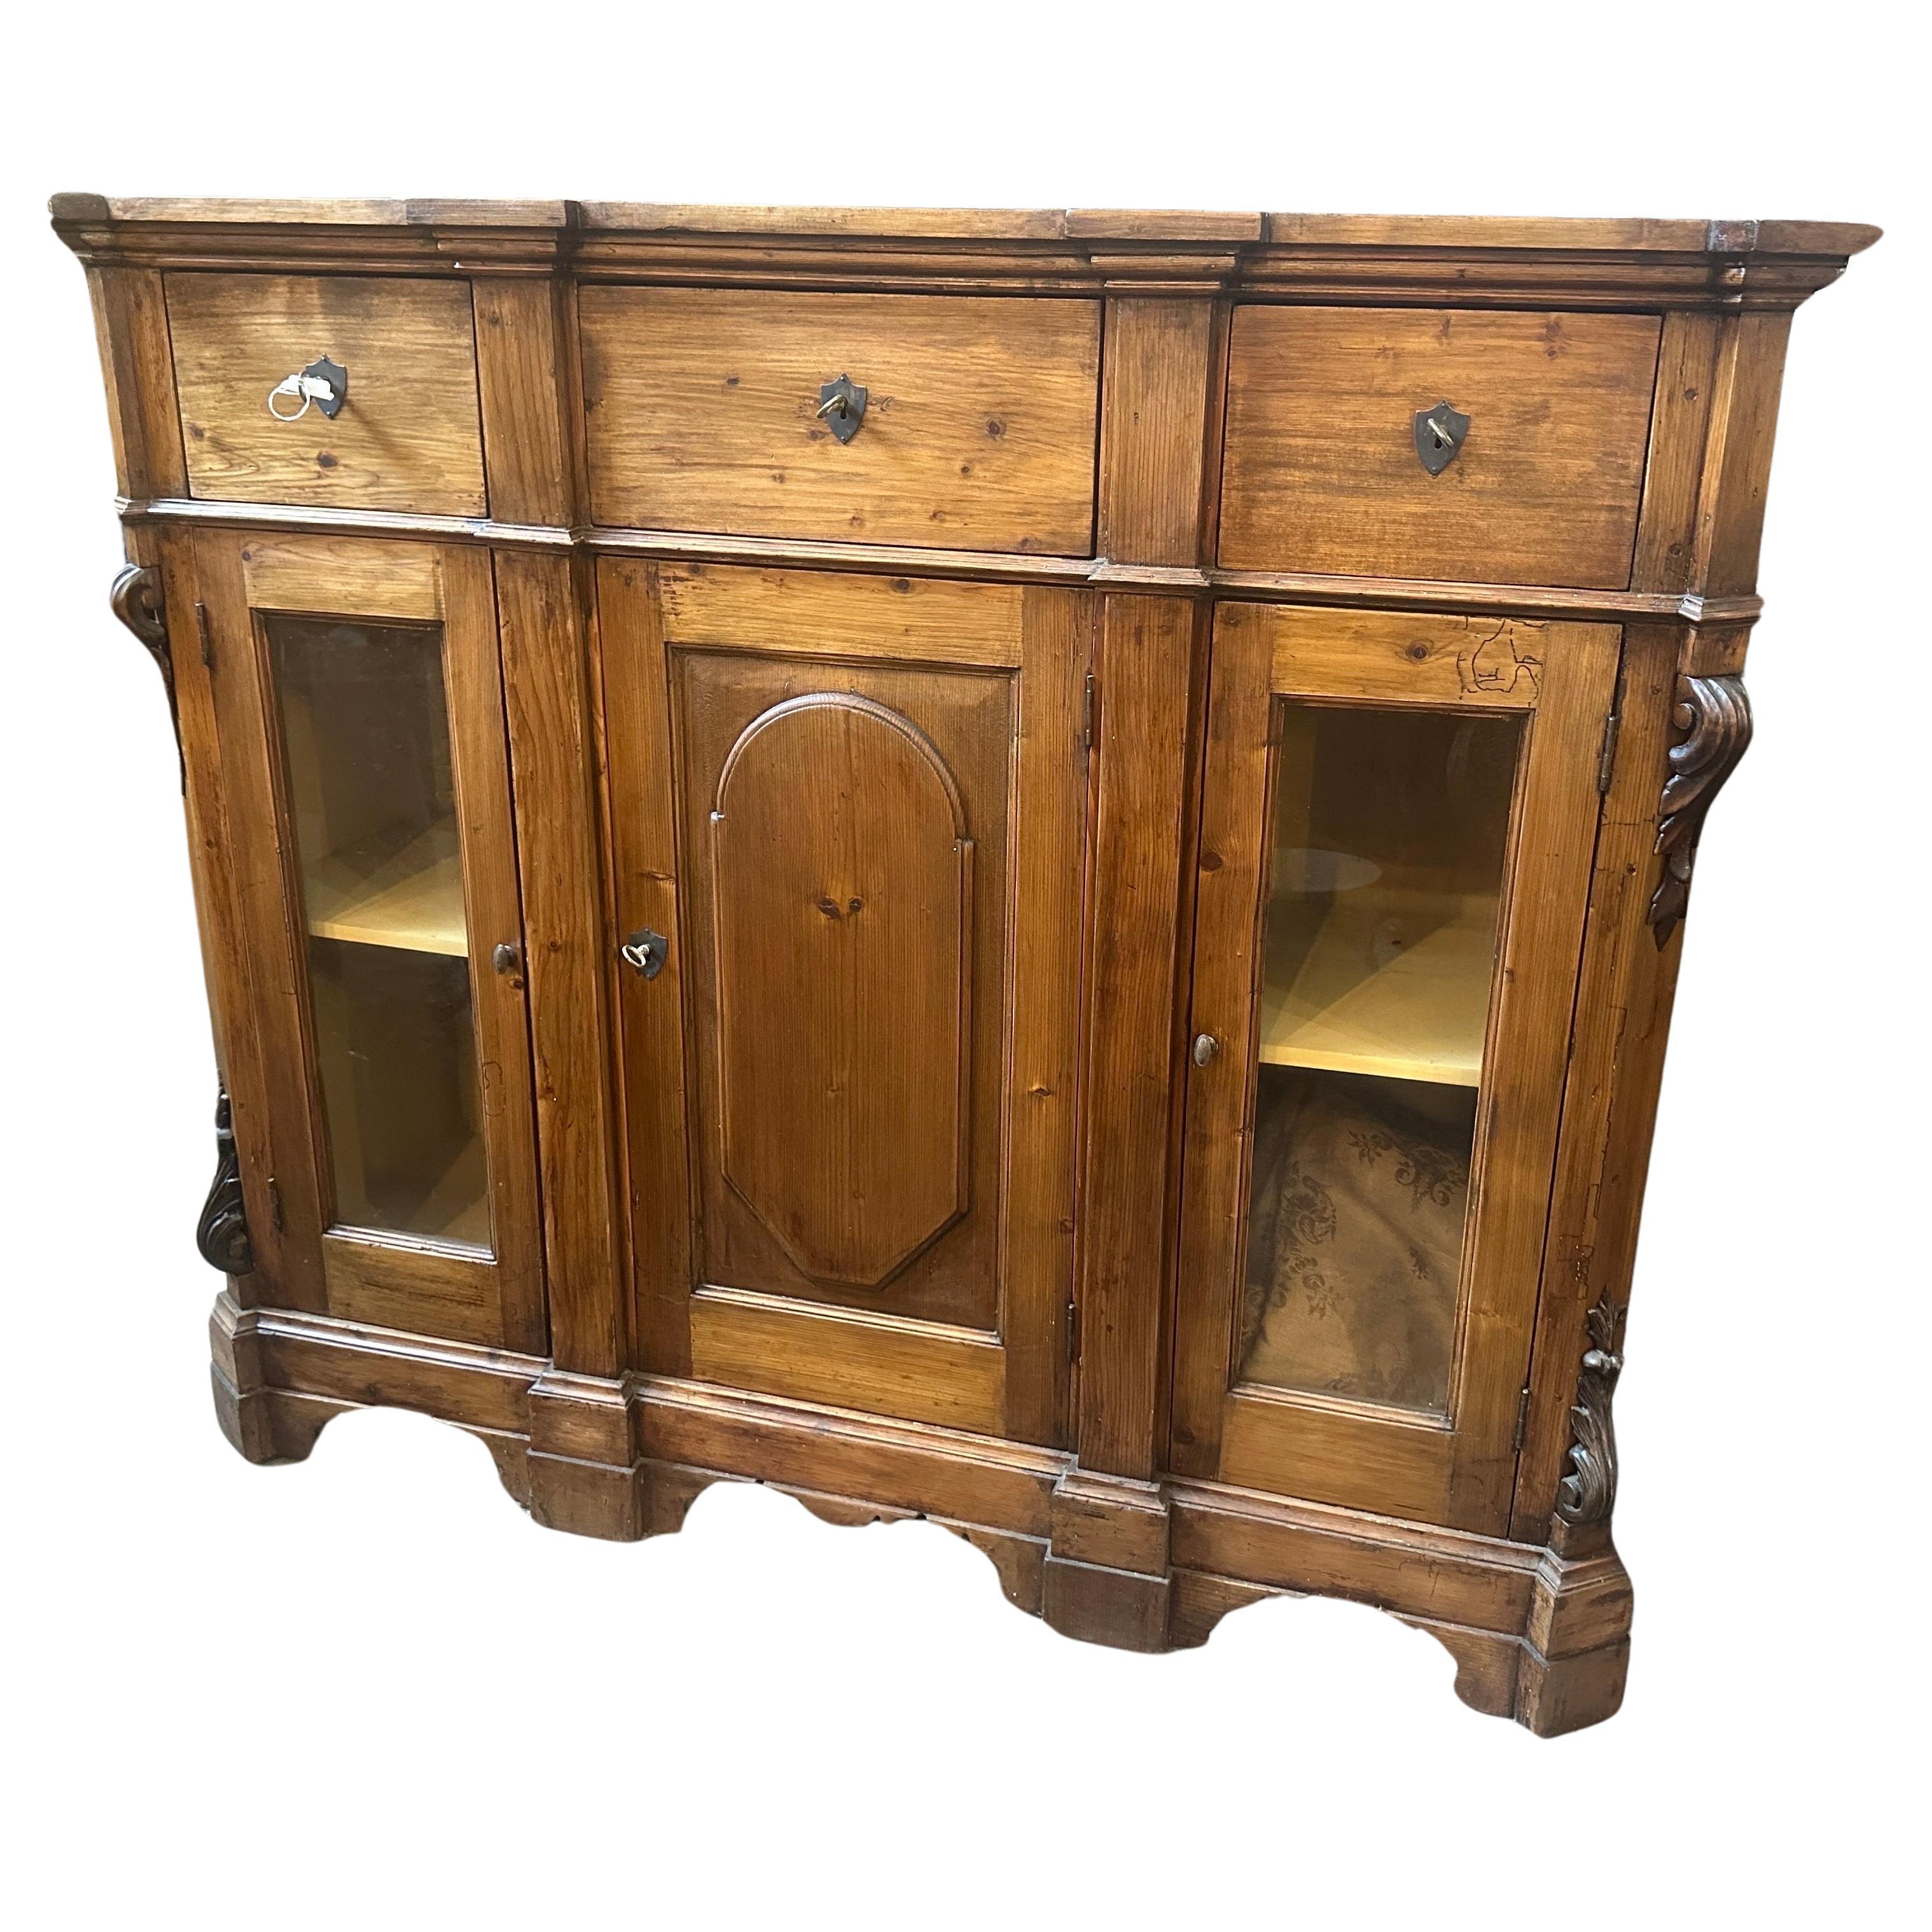 1870s Louis Philippe Hand-Carved Fir Wood Sicilian Credenza For Sale